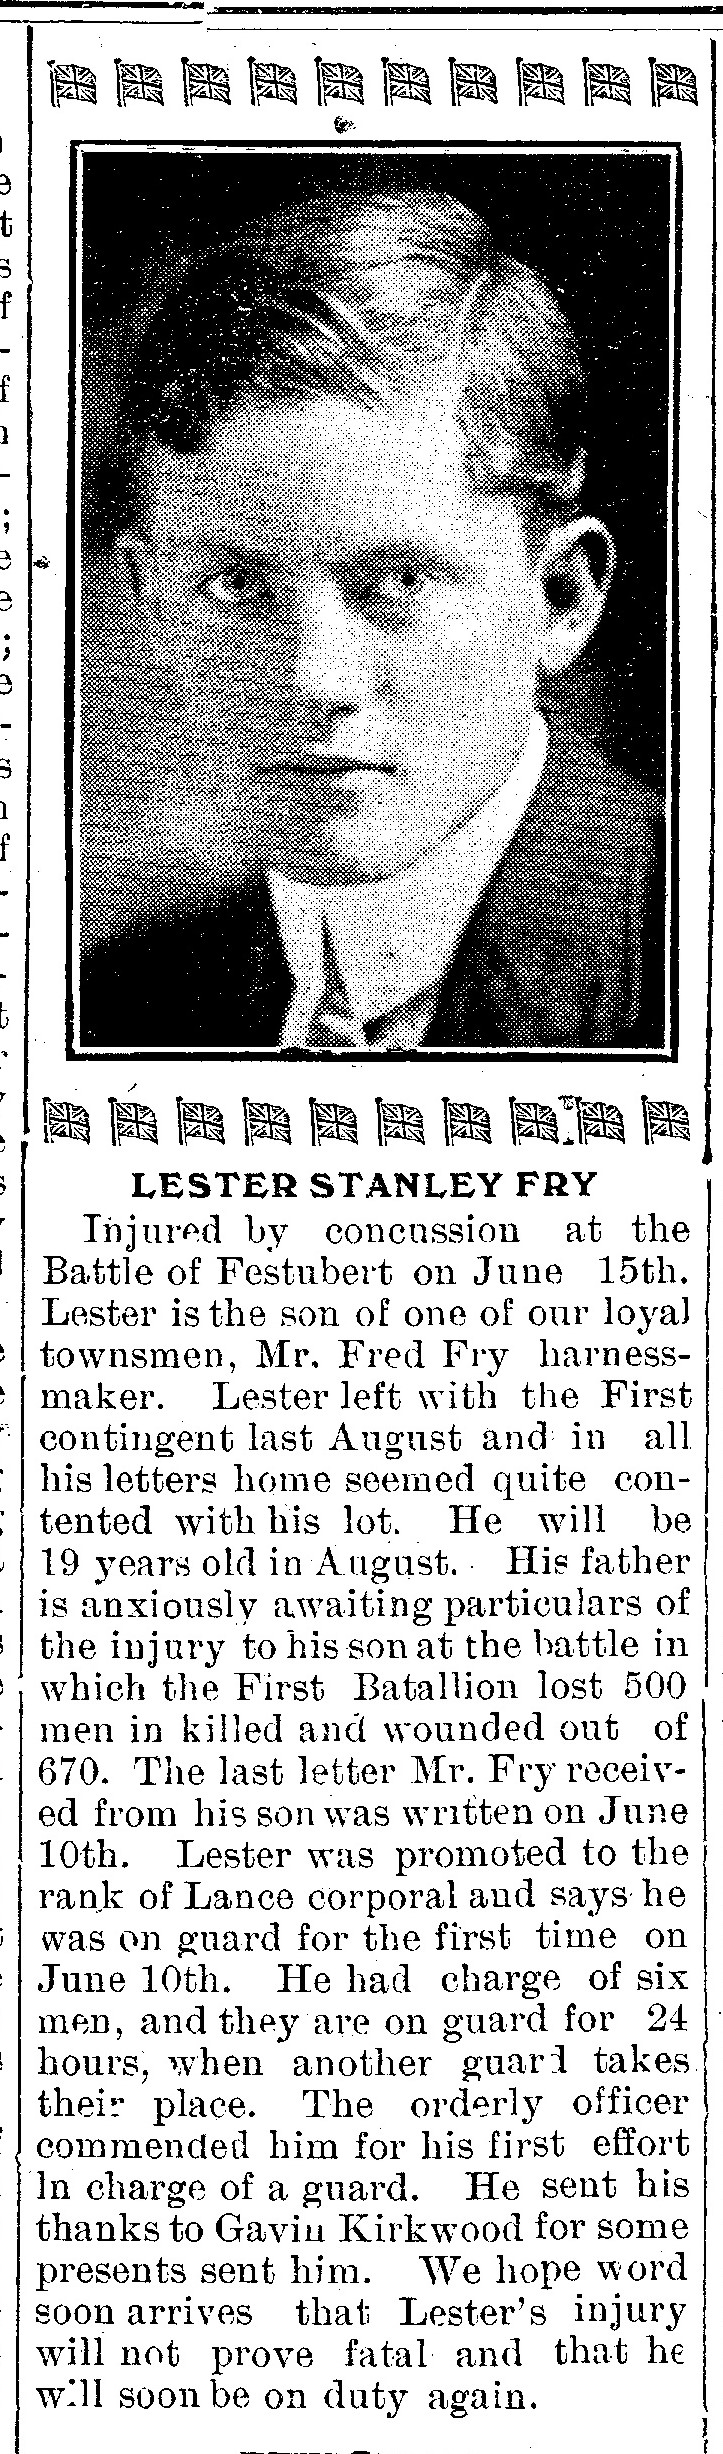 The Chesley Enterprise, July 1, 1915